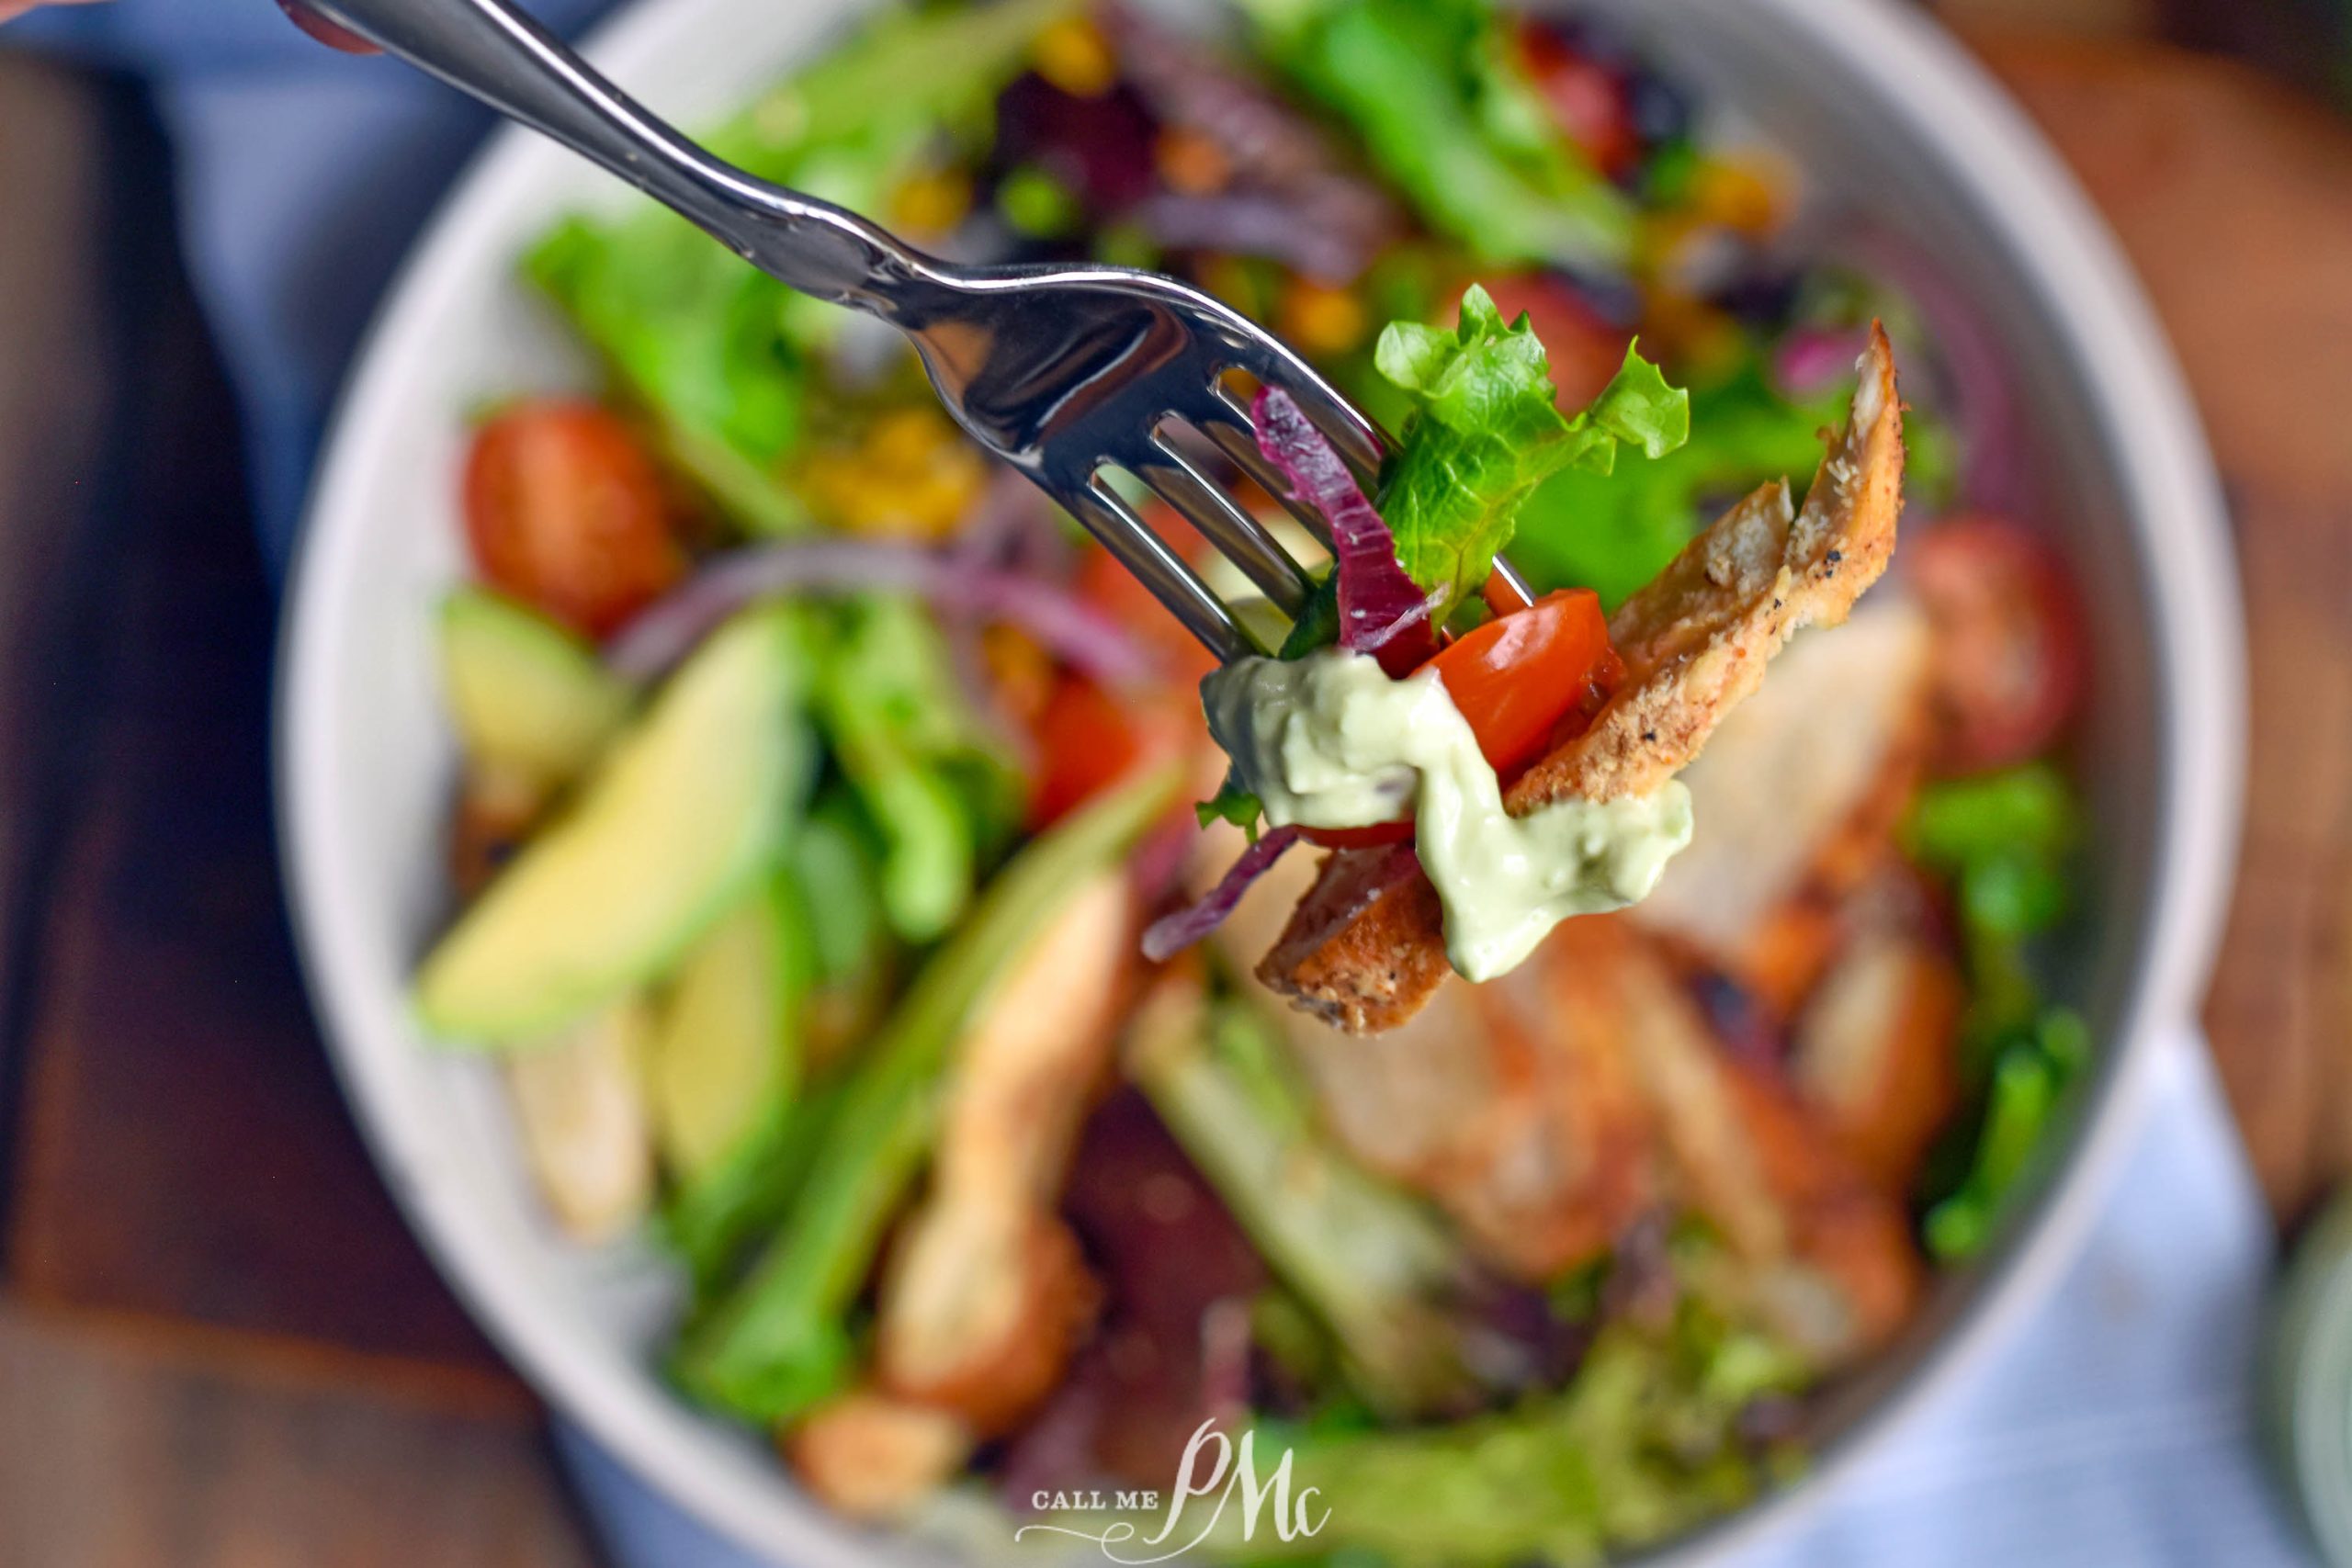  Blackened Chicken Salad bite on a fork with avocado sauce, lettuce, and tomato.